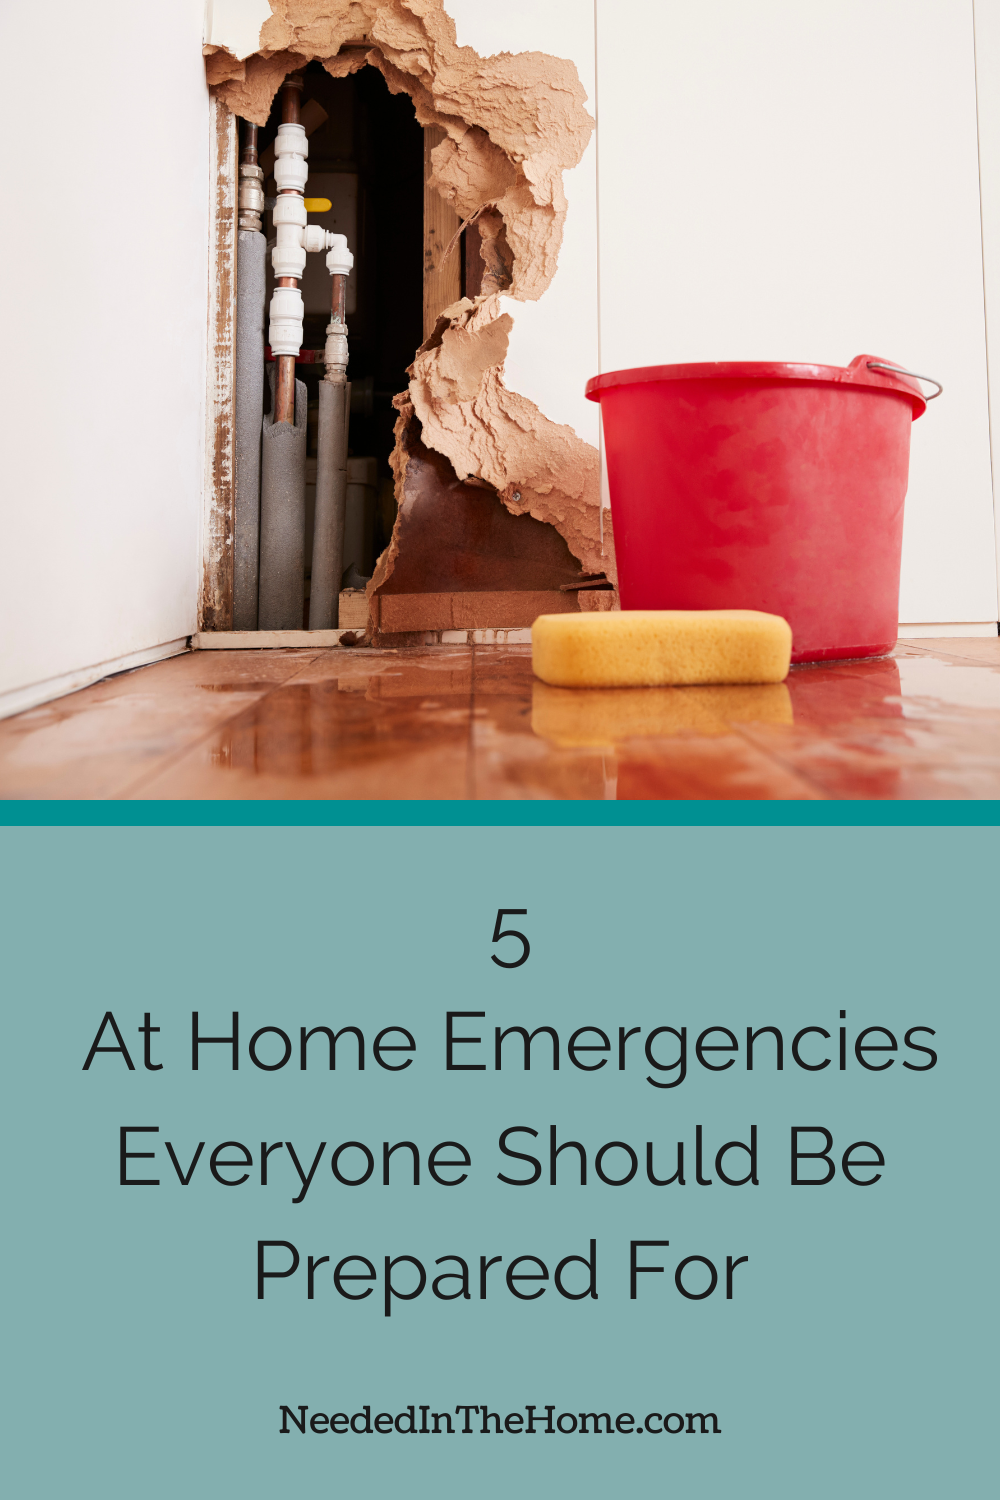 pinterest pin description 5 at home emergencies everyone should be prepared for burst pipes in wall next to bucket and sponge water on wood floor neededinthehome